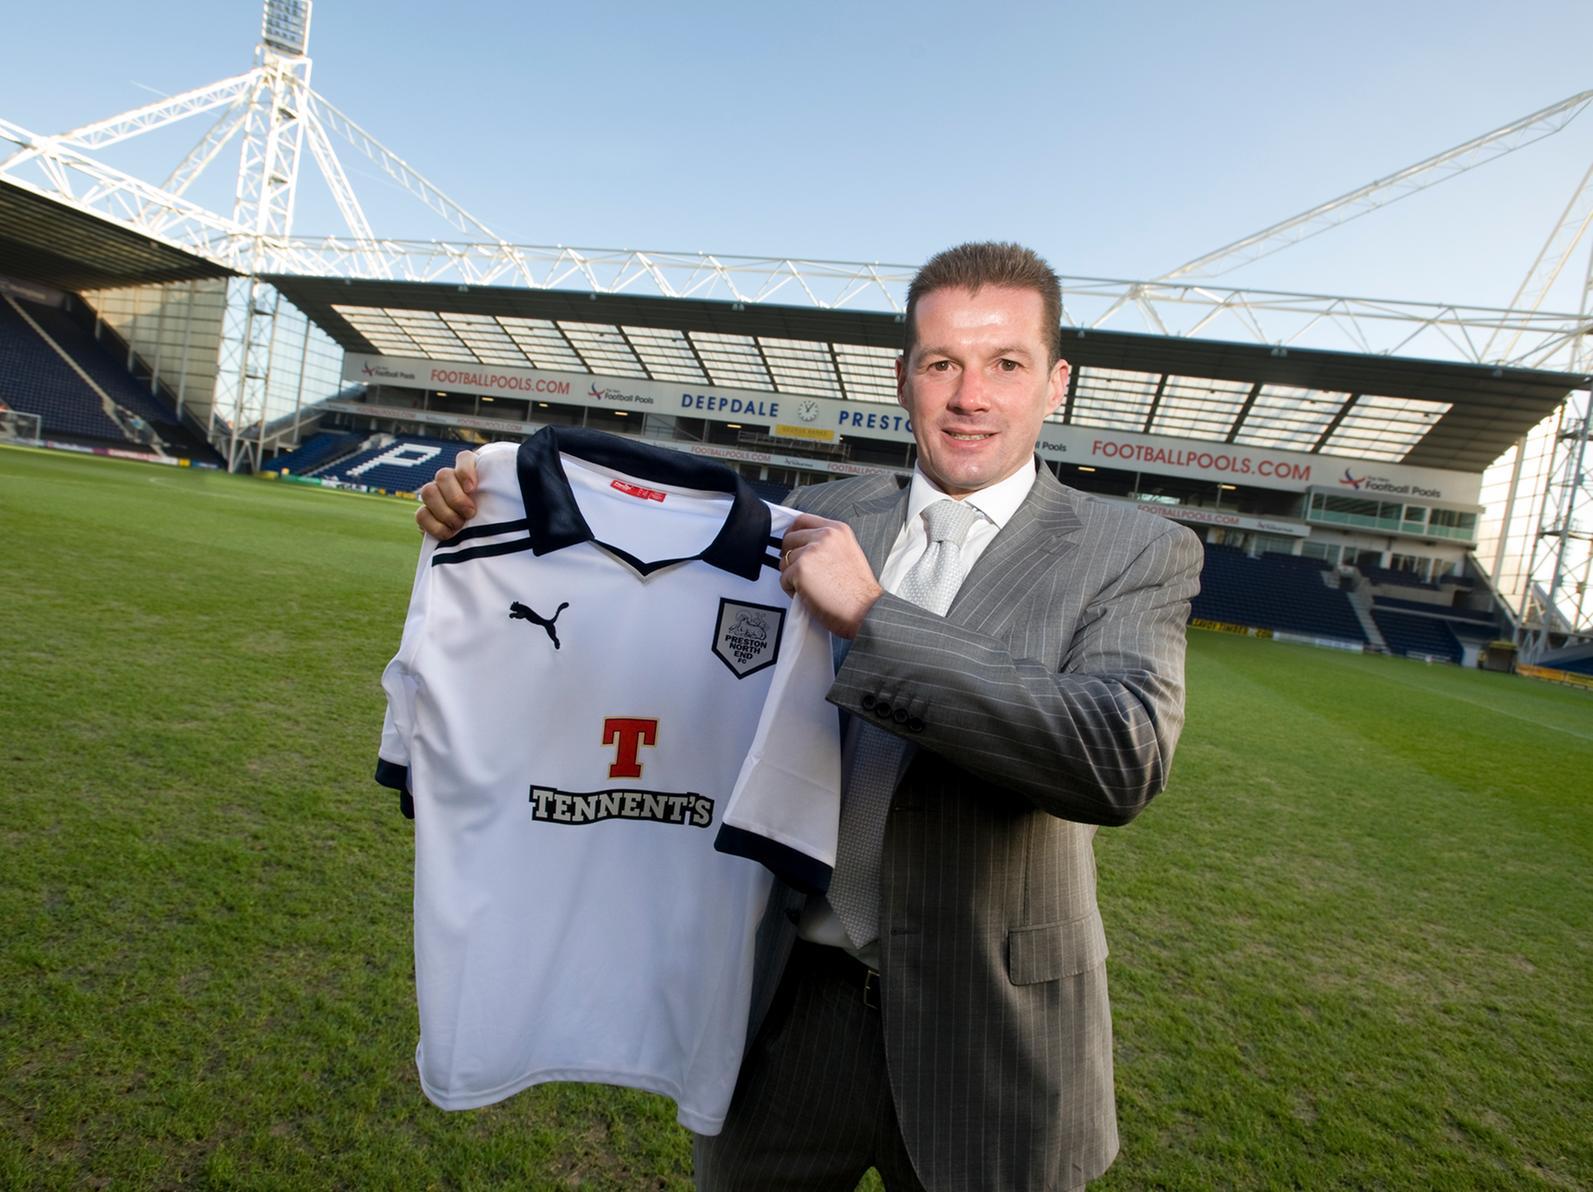 Graham Westley at his unveiling as Preston North End manager in January 2012